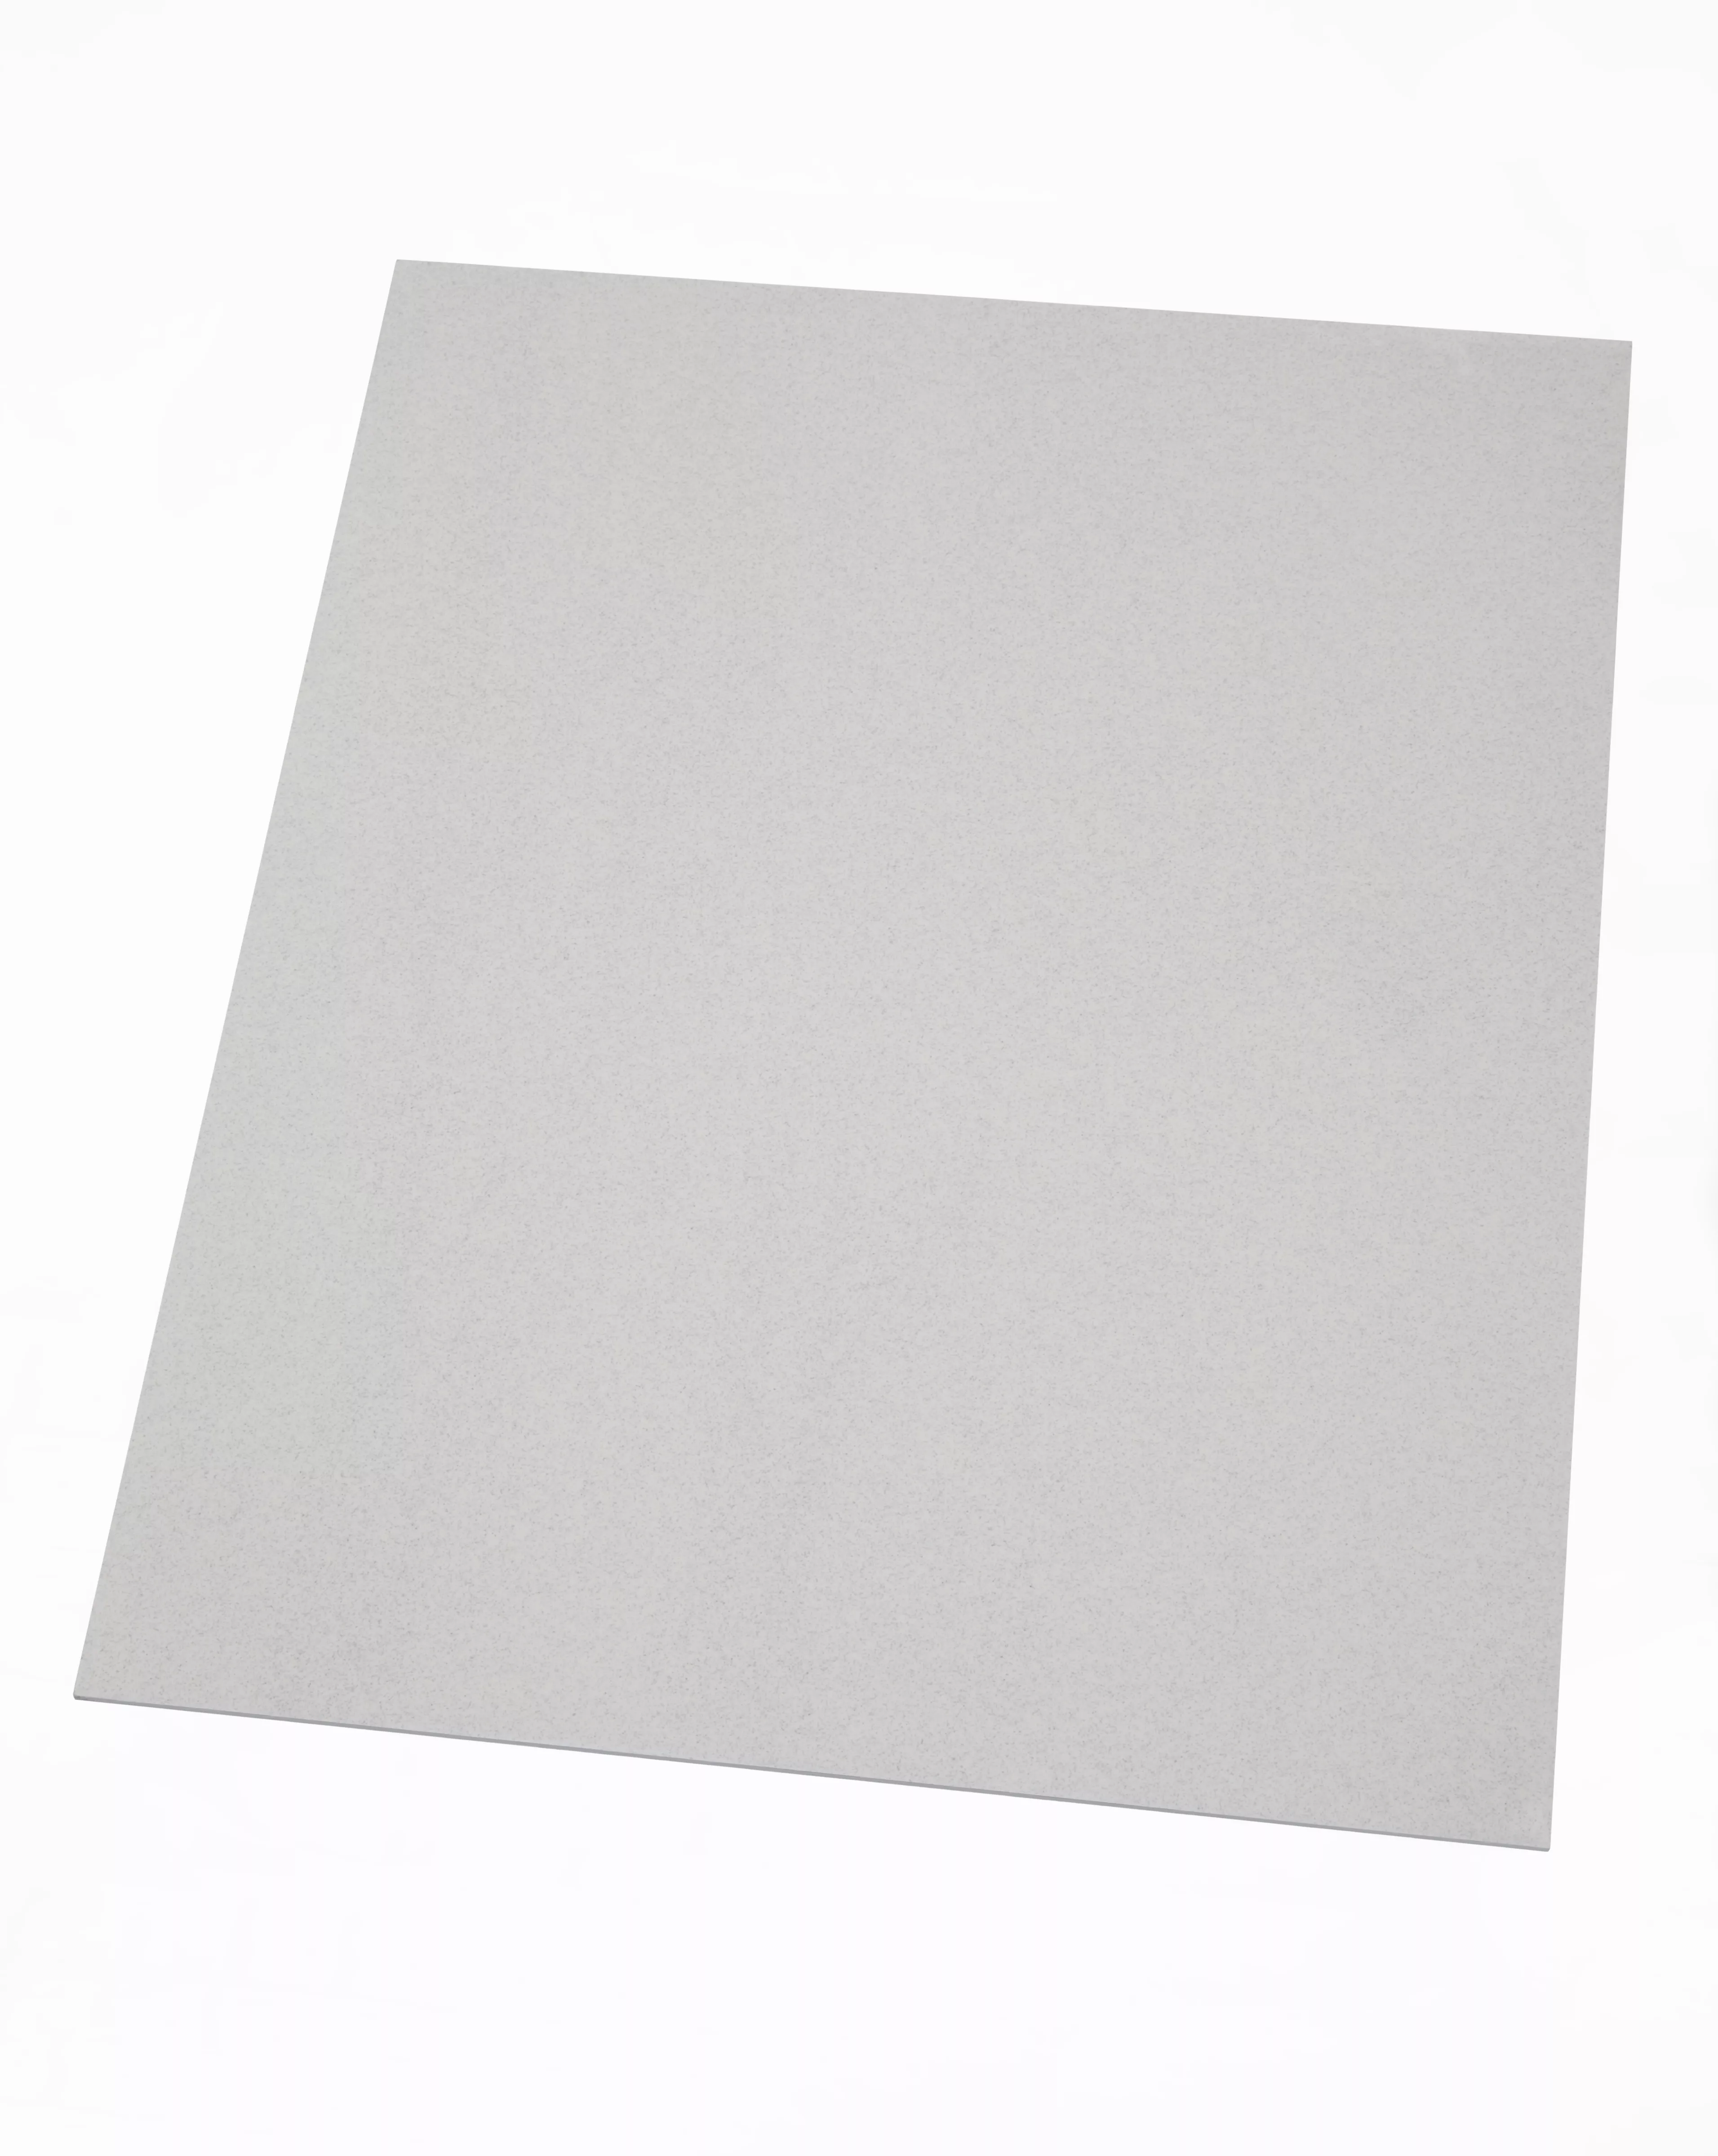 3M™ Thermally Conductive Acrylic Interface Pad 5589H-10, 240 mm x 1 mm x
20 m, 1 per Case